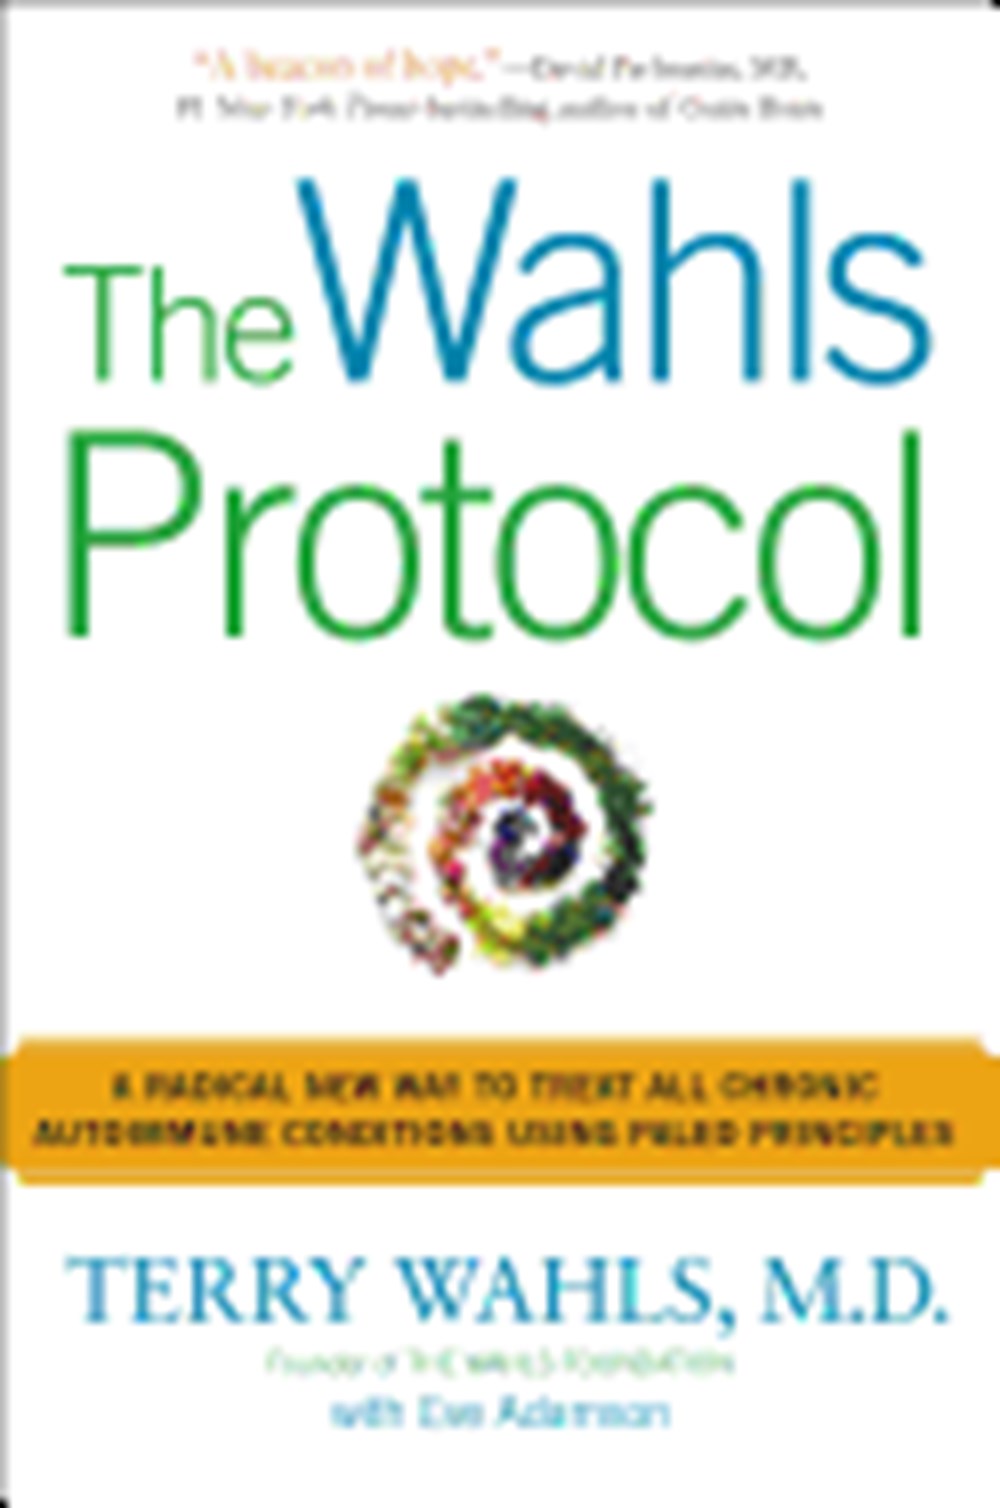 Wahls Protocol: A Radical New Way to Treat All Chronic Autoimmune Conditions Using Paleo Principles